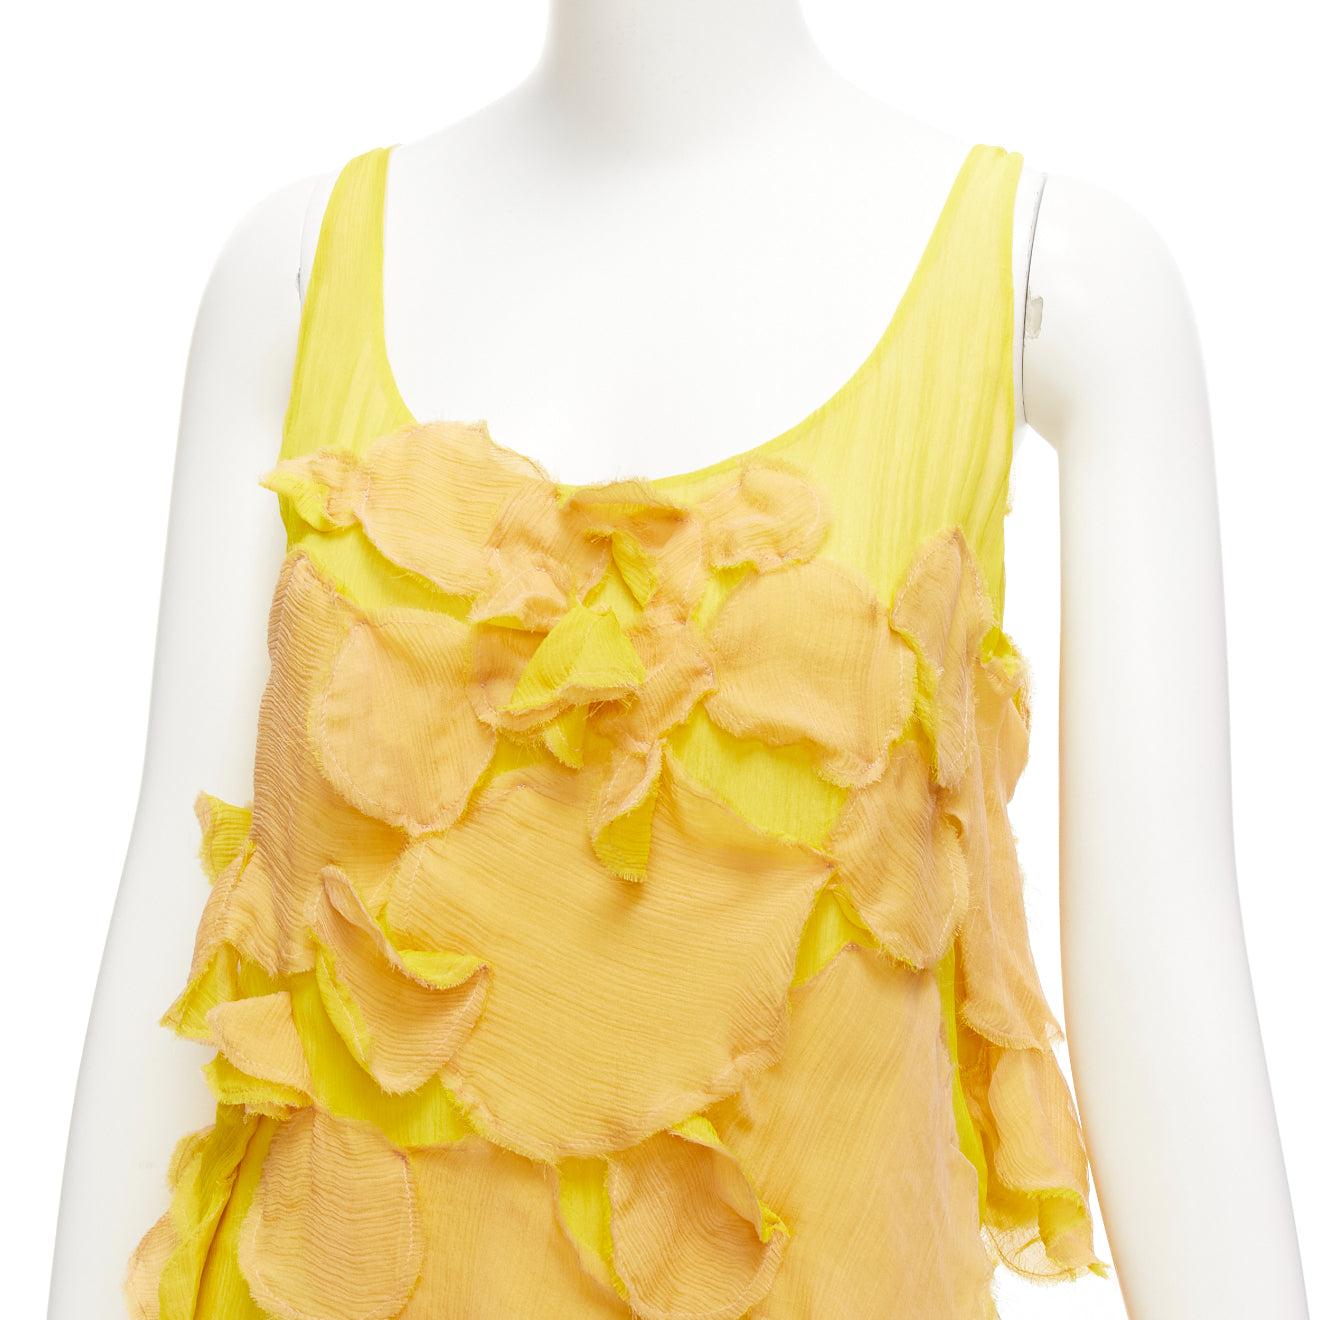 FENDI Vintage yellow nude 100% silk overlay flower petal mini dress IT44 L
Reference: AAWC/A01090
Brand: Fendi
Material: Silk
Color: Yellow, Nude
Pattern: Solid
Closure: Pullover
Lining: Nude Silk
Extra Details: Yellow and nude overlay silk petal